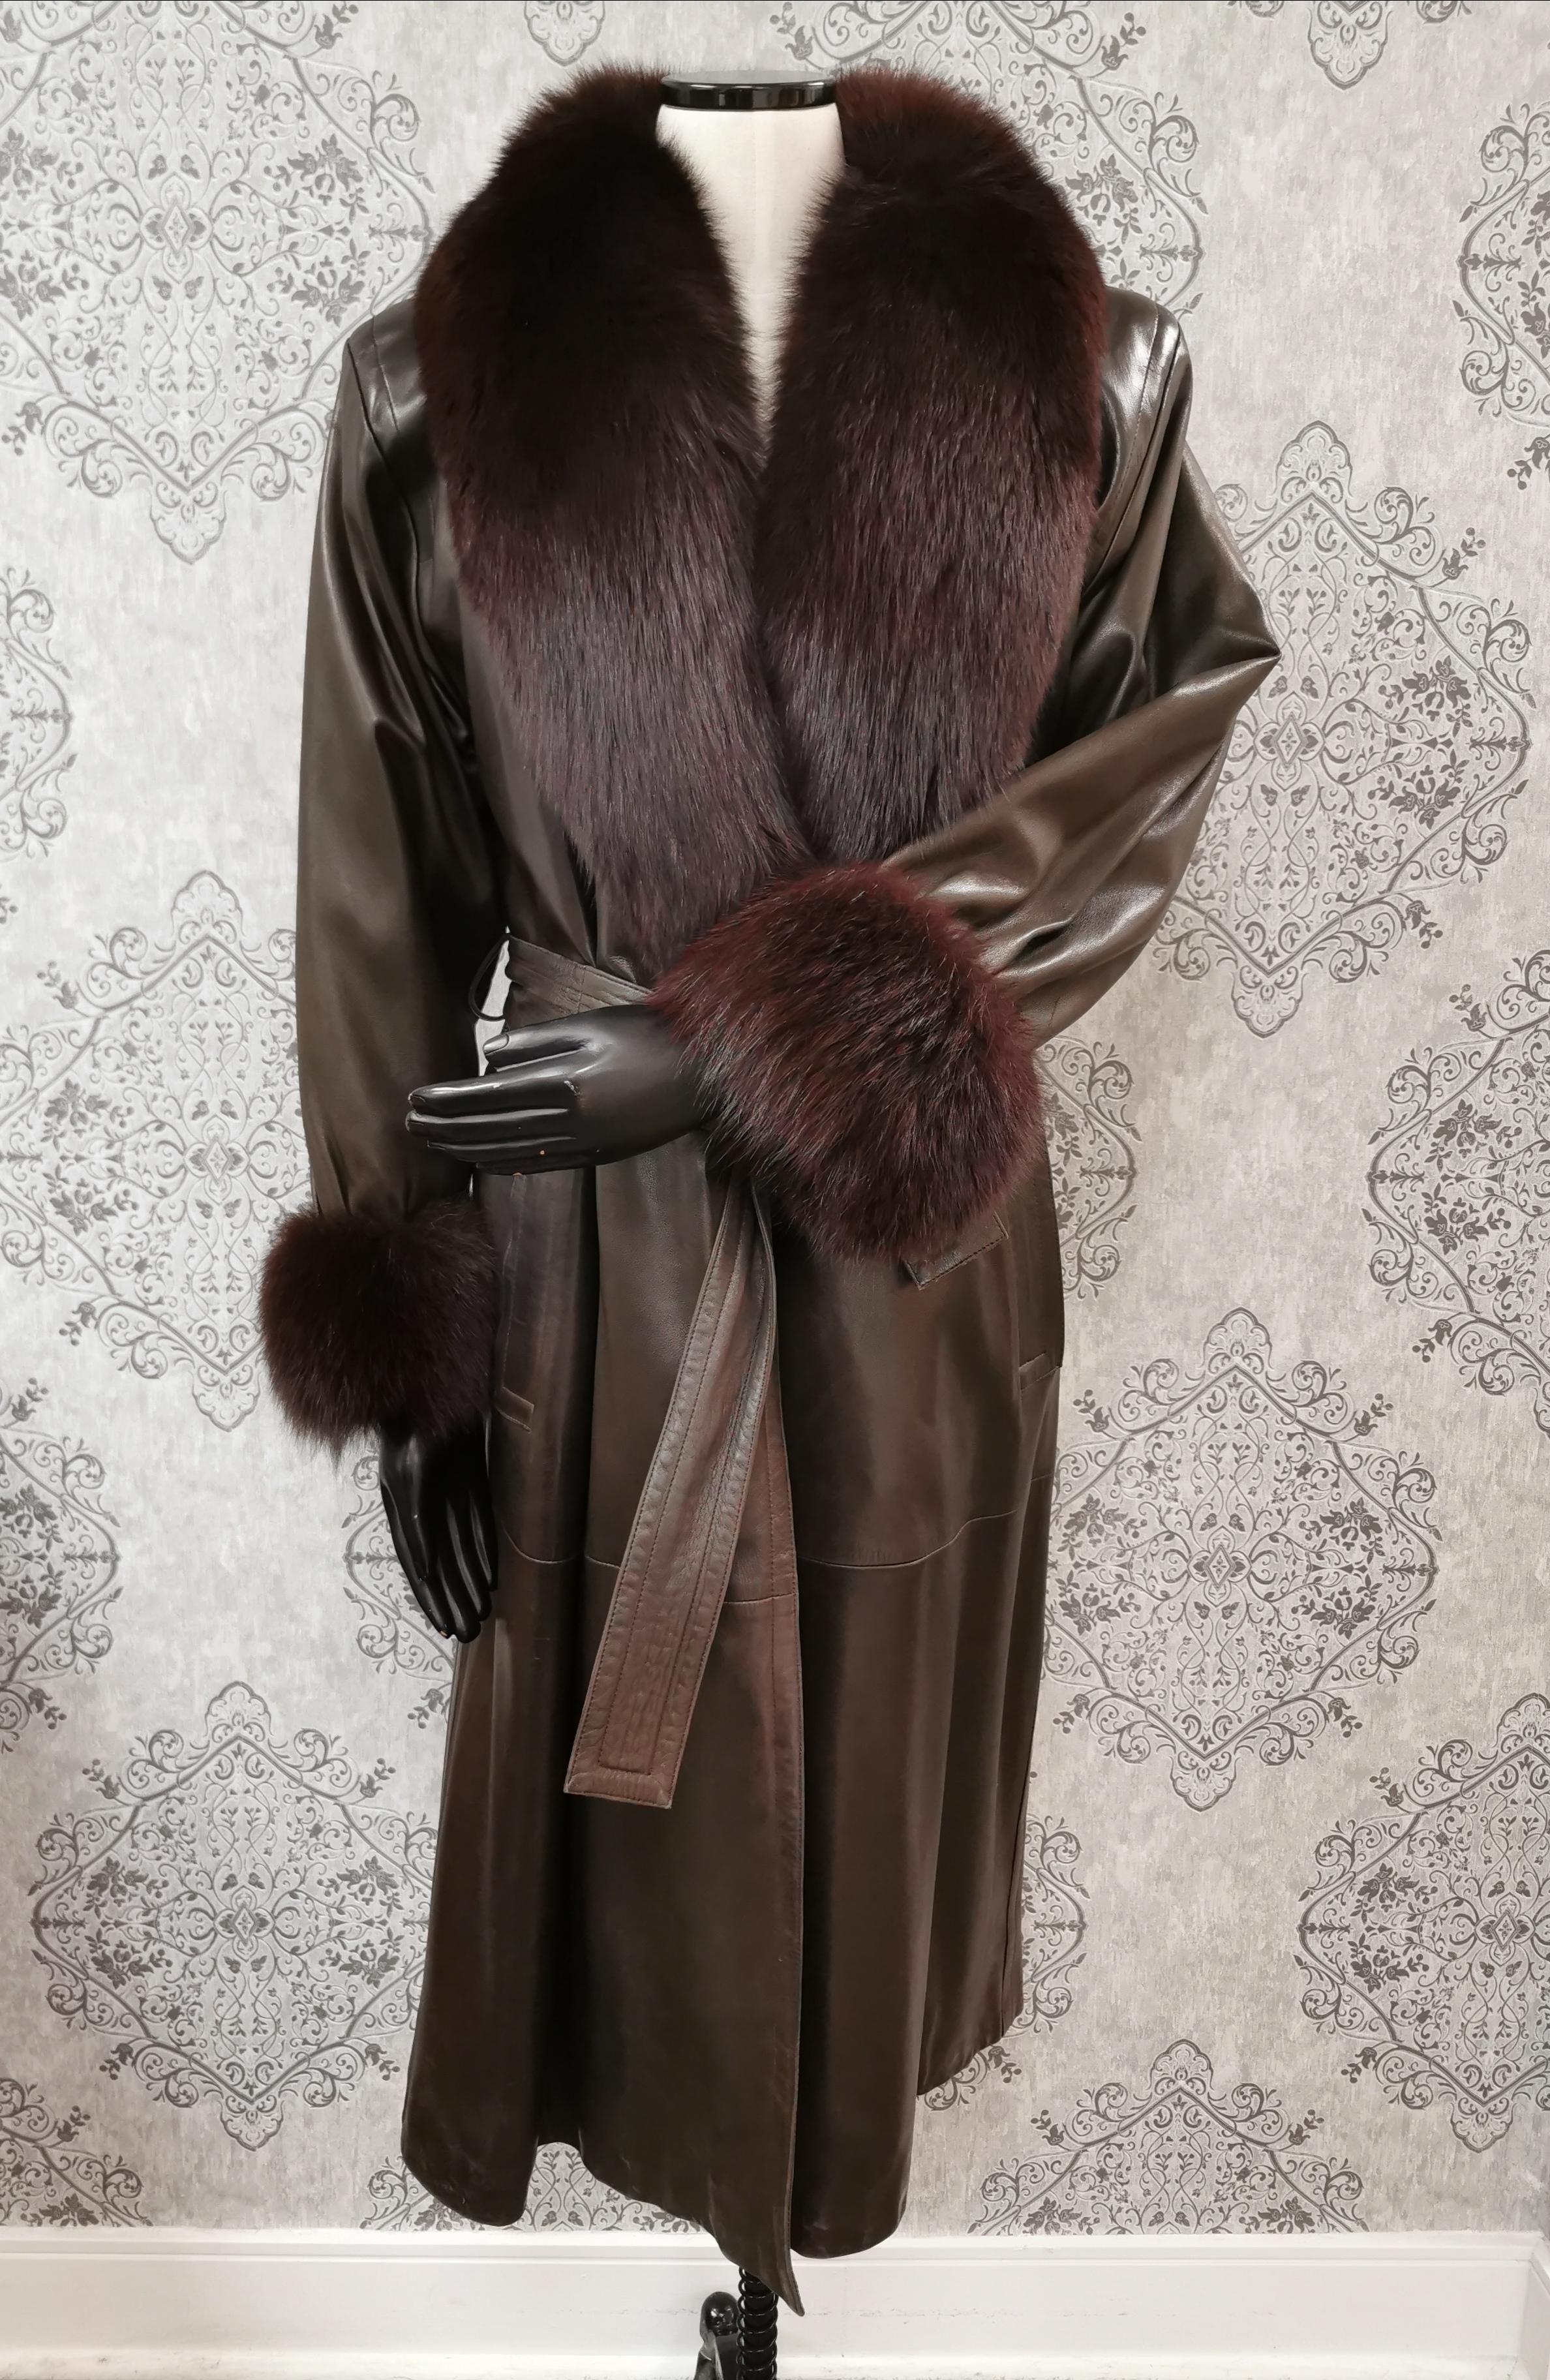 PRODUCT DESCRIPTION:

gorgeous design Yves Saint Laurent Fourrures Lambskin Coat with Shadow Fox Fur trim for the collar and cuffs and sheared beaver lining and a leather belt

Condition: Pristine

Closure: Buttons and belt

Color: Carob brown and